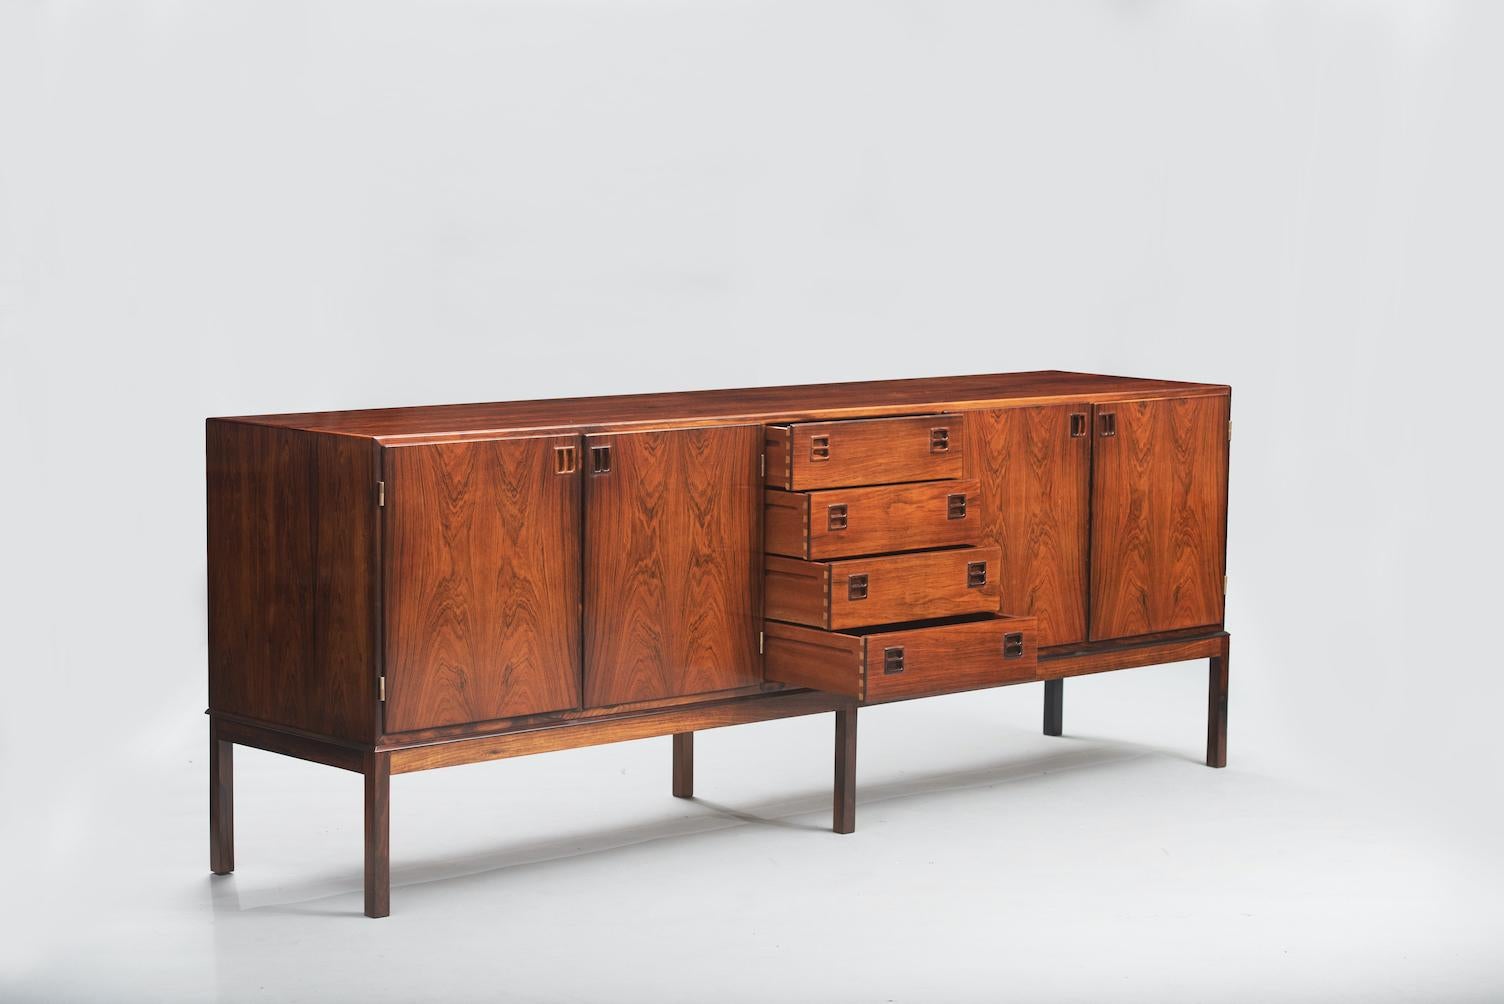 Johannes Andersen long sideboard in veneered rosewood, front with four doors enclosing shelves and four drawers, frame with legs in solid rosewood. Produced by Bernhard Pedersen & Son.